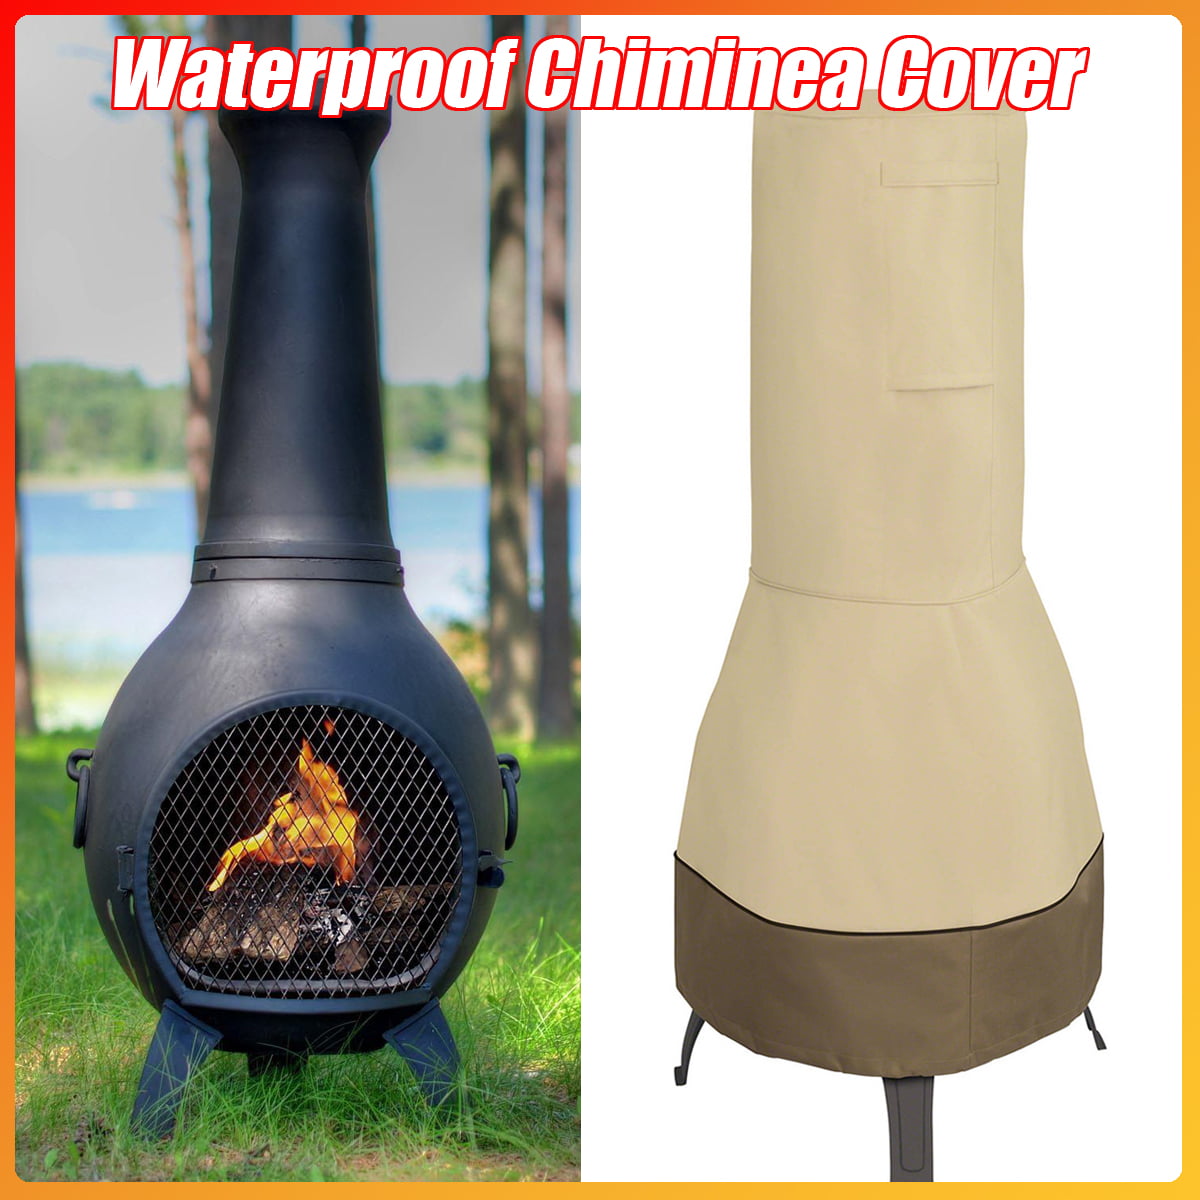 Outdoor Patio Chiminea Cover Heavy Duty Waterproof UV Protective Heater Cover 